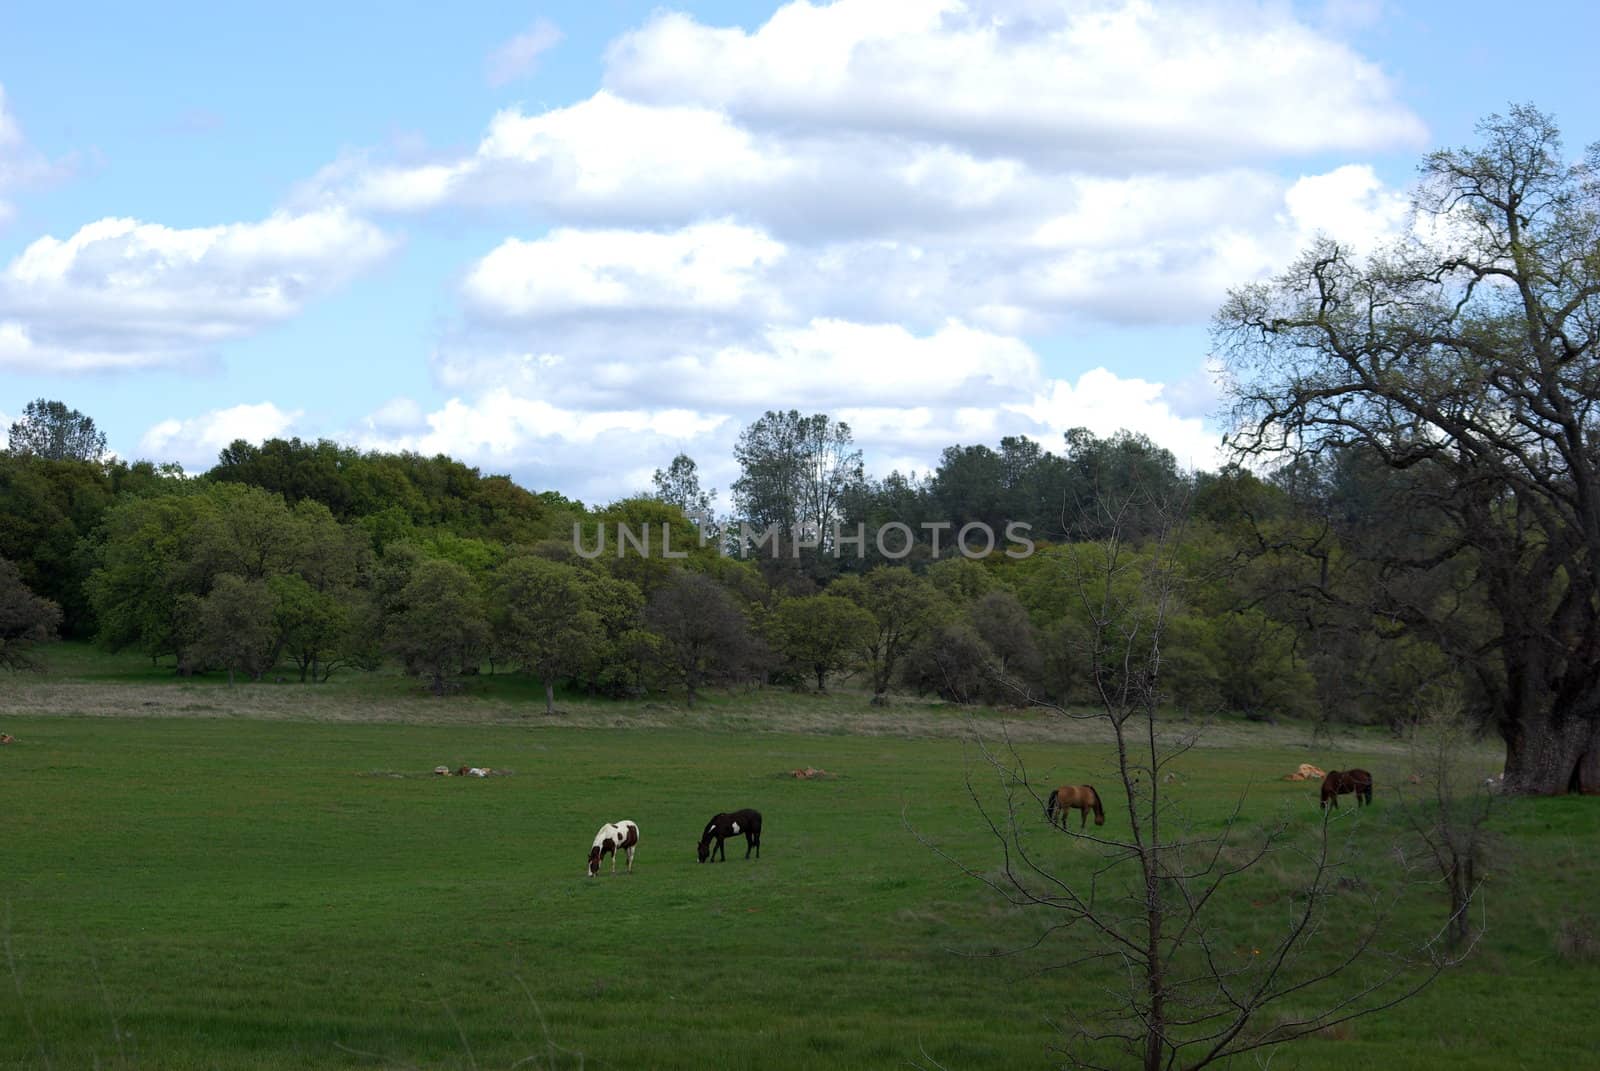 Numerous Horses grazing in a pasture surrounded by Oak trees